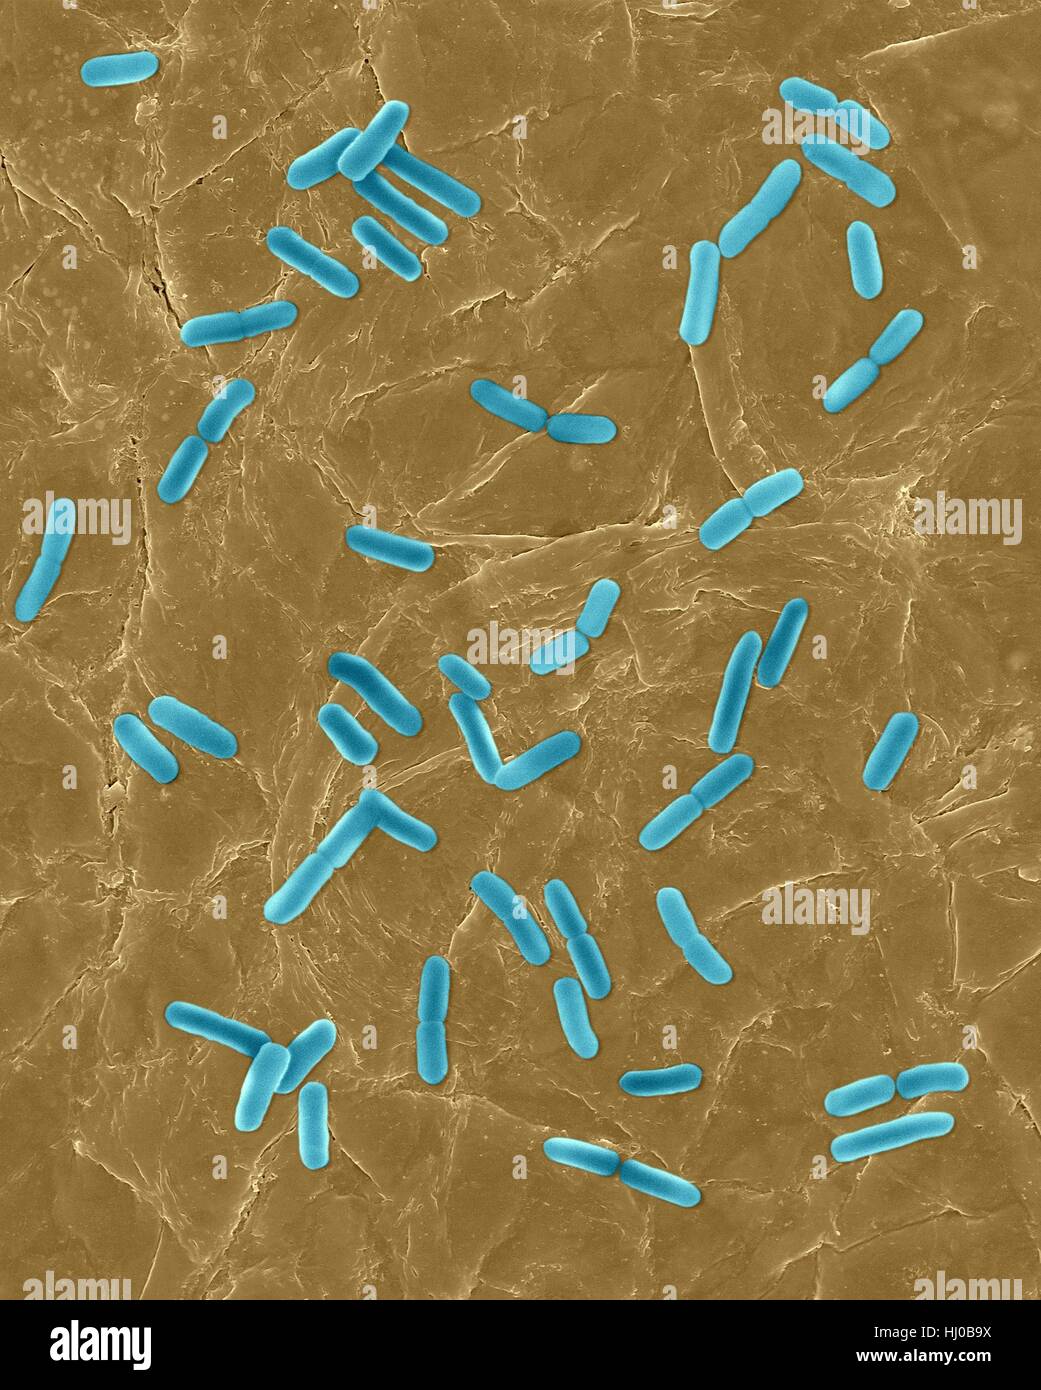 Coloured scanning electron micrograph (SEM) of Photocomposite,E.coli on surface of human skin.Escherichia coli is Gram-negative,facultatively anaerobic,enteric,rod prokaryote.This bacterium is normally part of human animal microbiota.Most E.coli strains are harmless,but some strains can cause serious problems such as: food poisoning,urinary tract infections,traveller's diarrhoea nosocomial infections.The E.coli 0157:H7 strain is fatal to humans if contracted when contaminated meat is cooked inadequately.Magnification: bacteria x800; skin x200 when shortest axis printed at 25 millimetres. Stock Photo